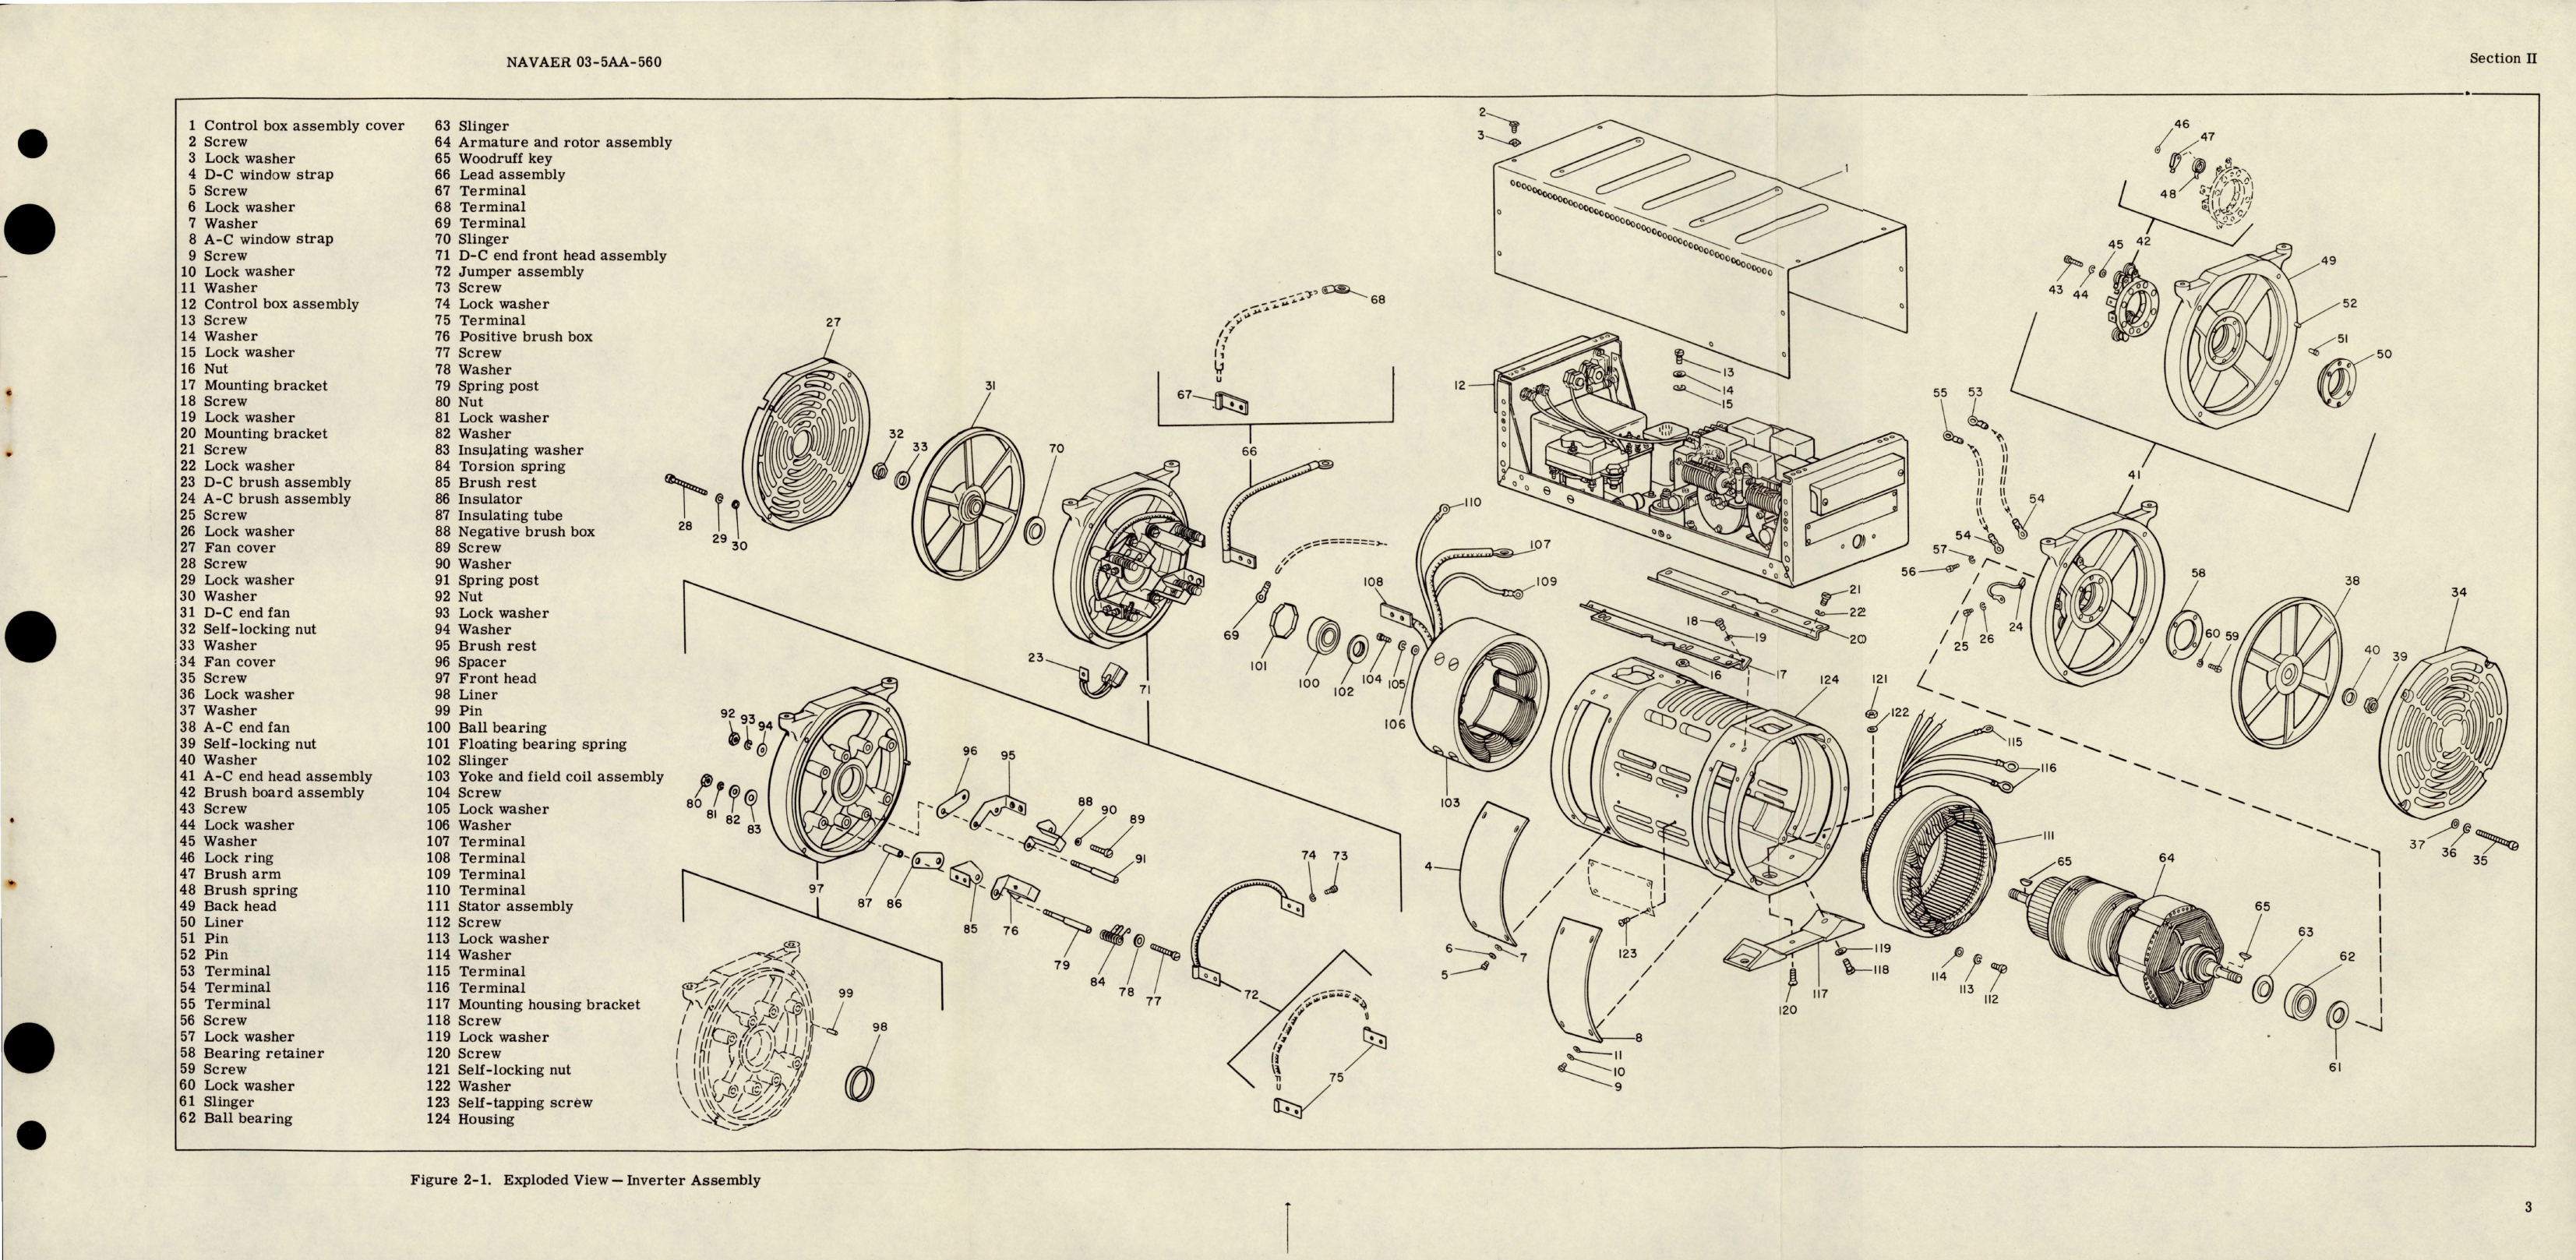 Sample page 7 from AirCorps Library document: Overhaul Instructions for Inverter - Type 32E06-1-A 